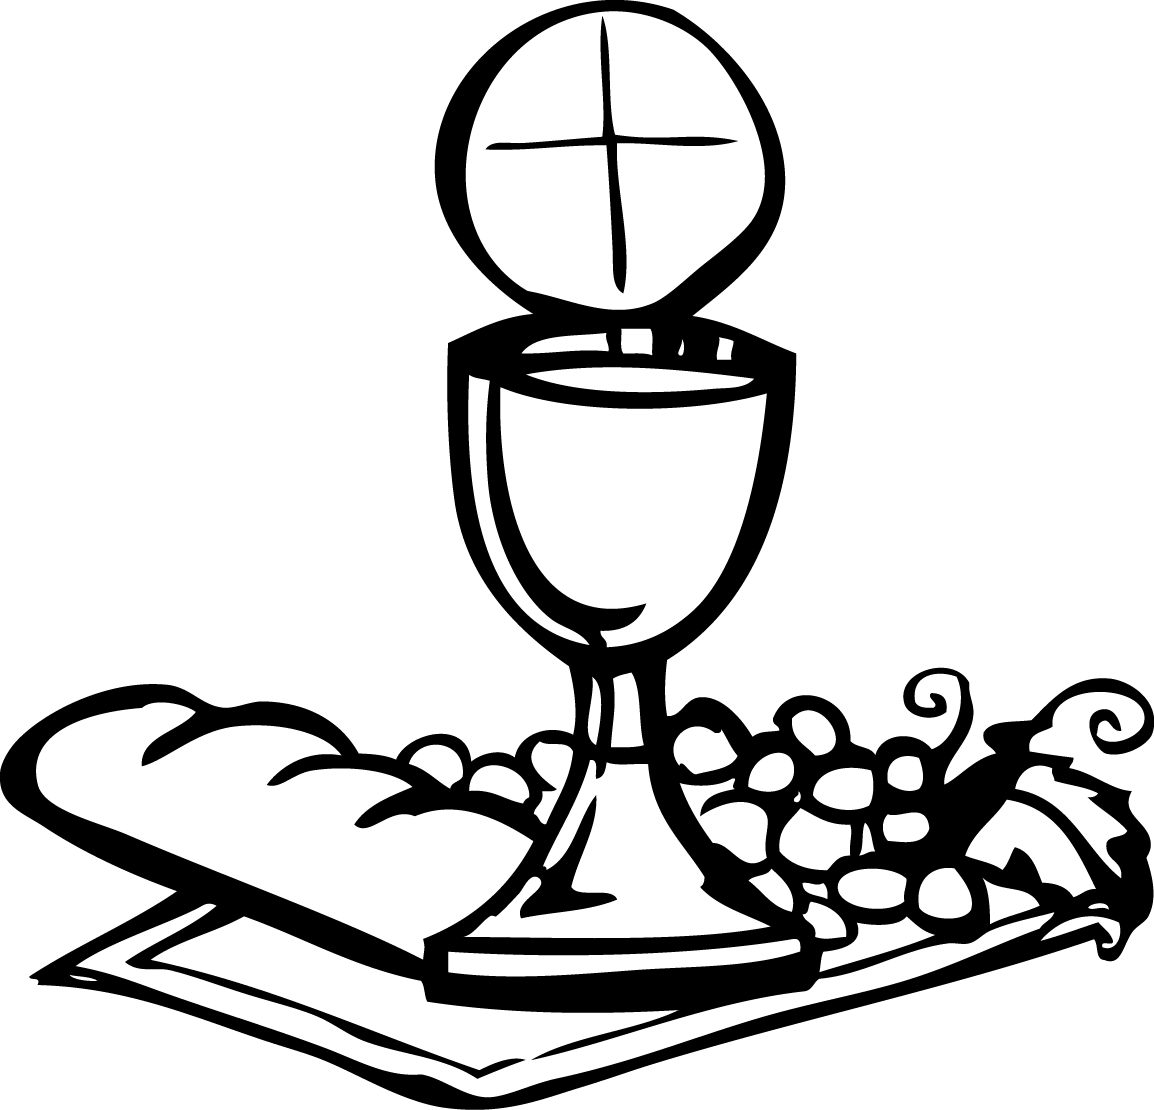 Holy Communion Coloring Pages | Jos Gandos Coloring Pages For Kids